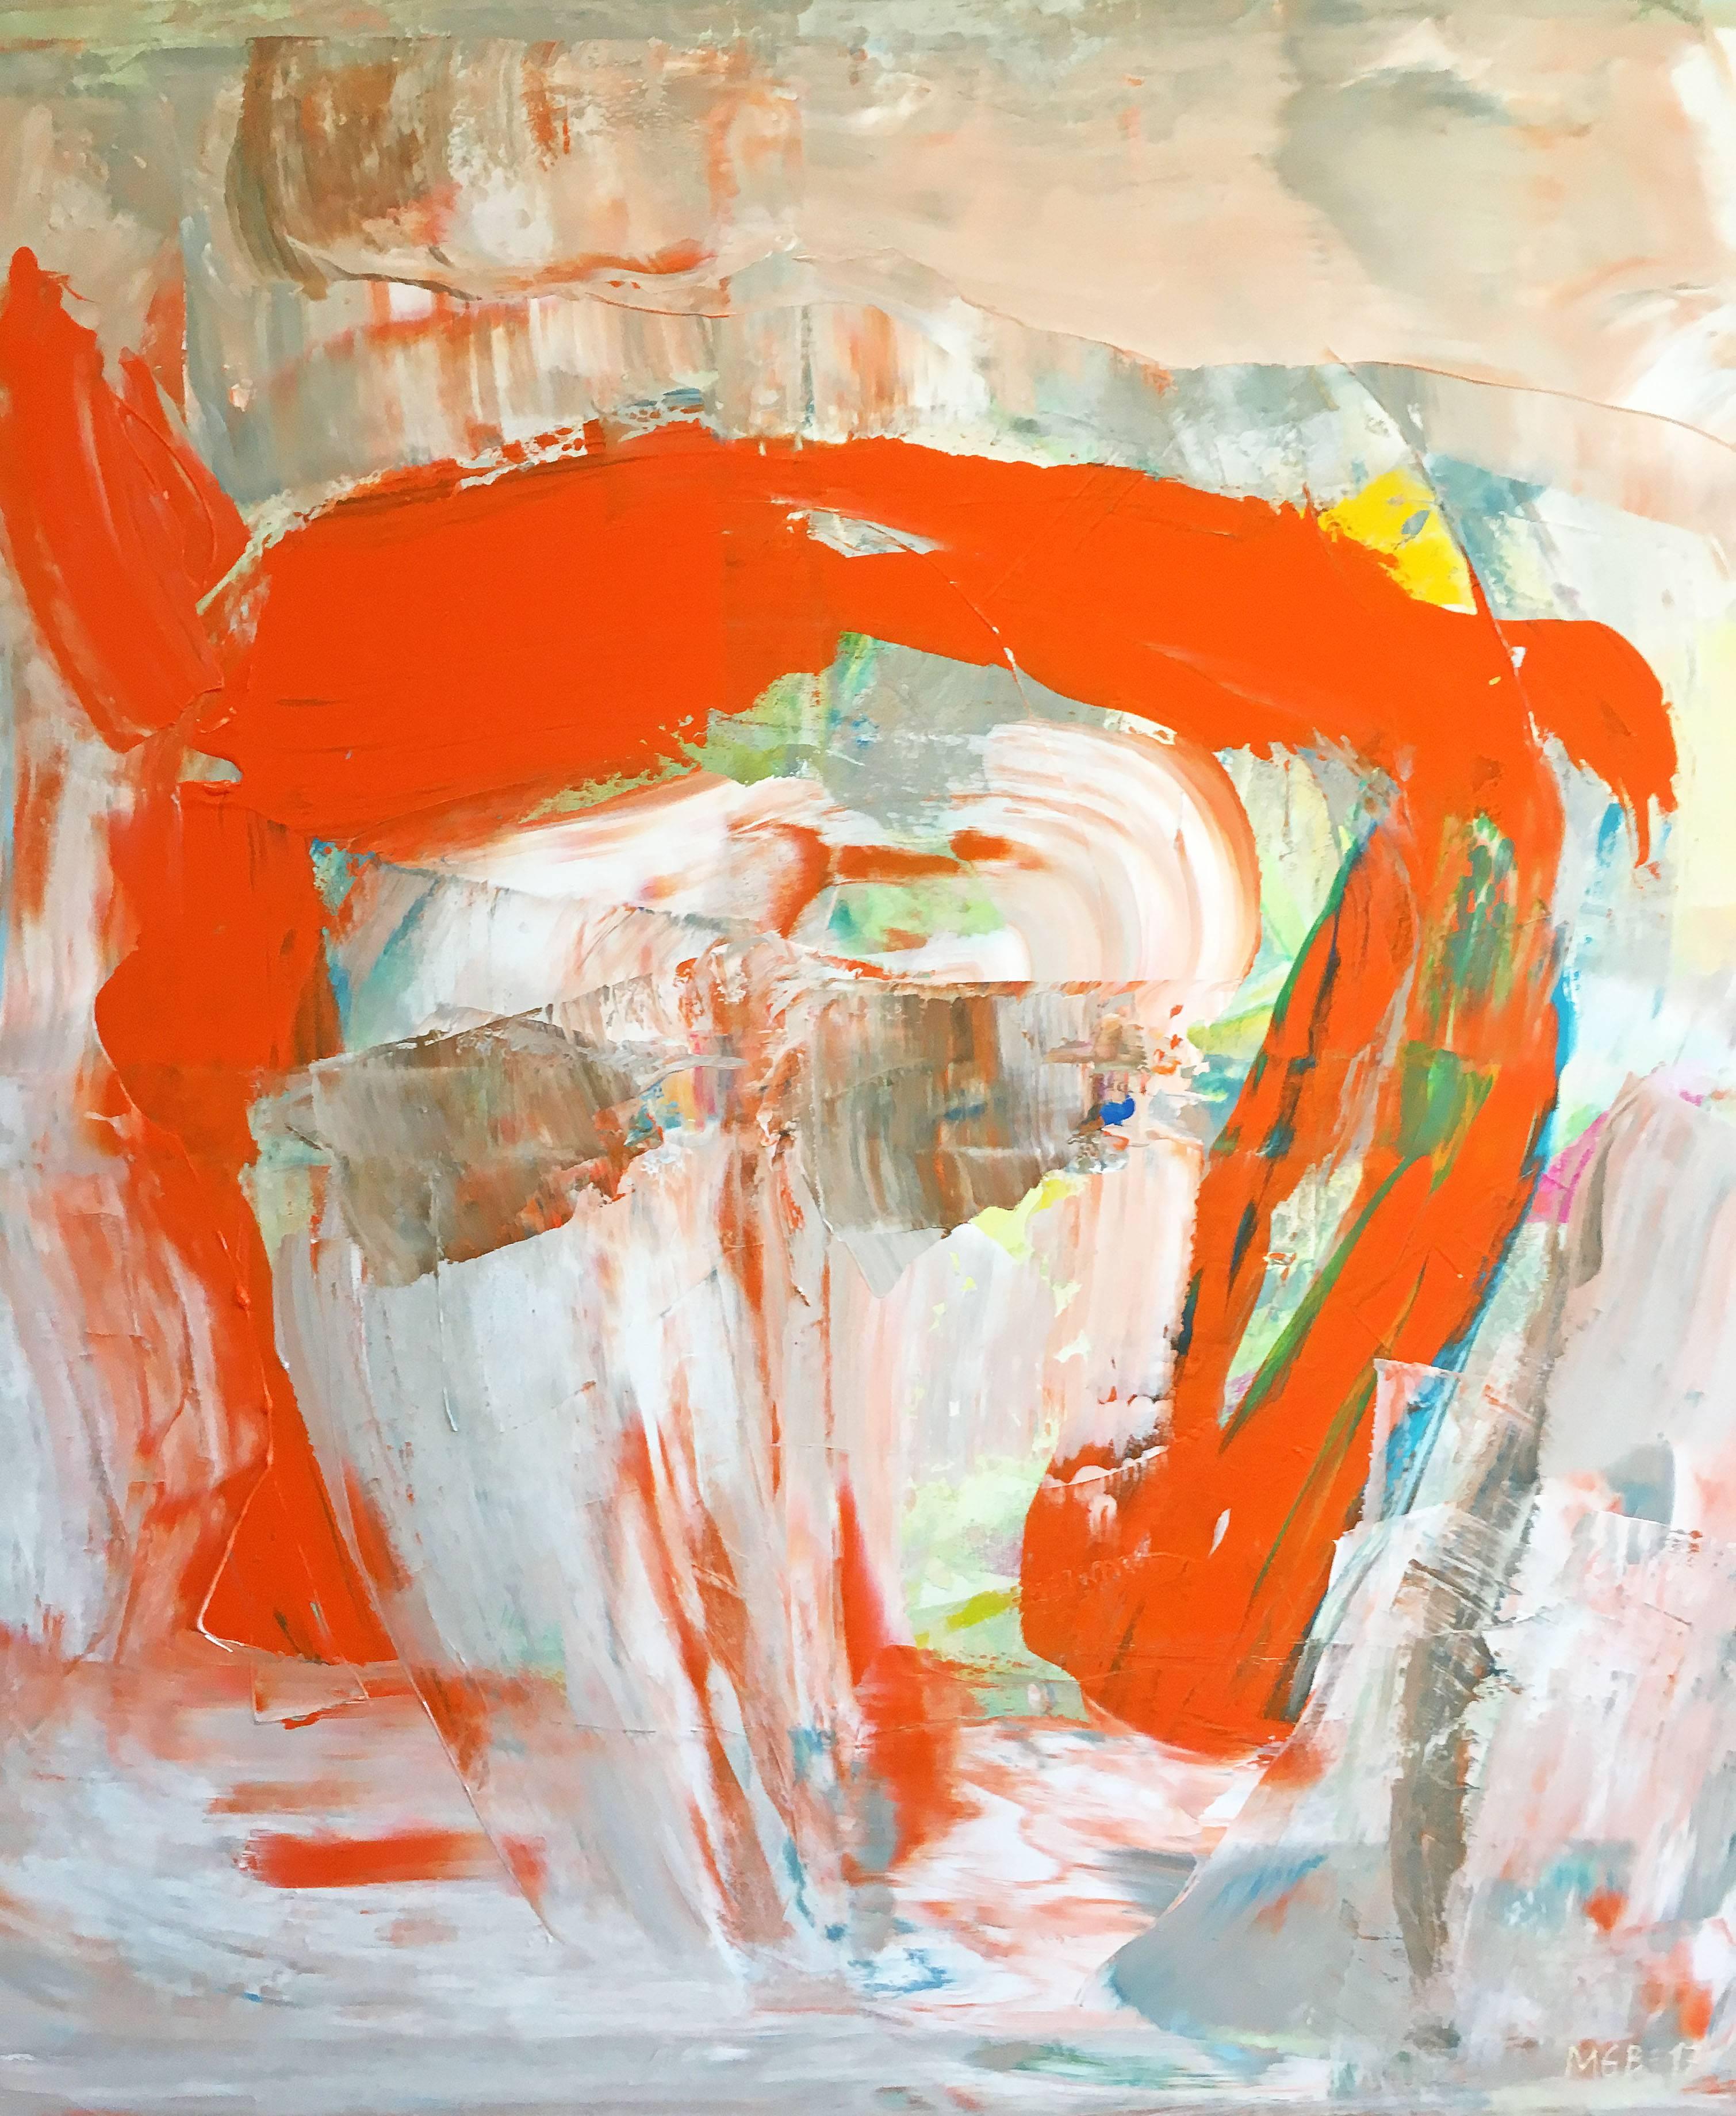 'Hello', 2017 by abstract Norwegian artist, Marit Geraldine Bostad. Acrylic on canvas, 41 x 41 inches. This brightly colored abstract figurative painting incorporates large gestural strokes in bold colors of orange, pink, white, brown, and grey.